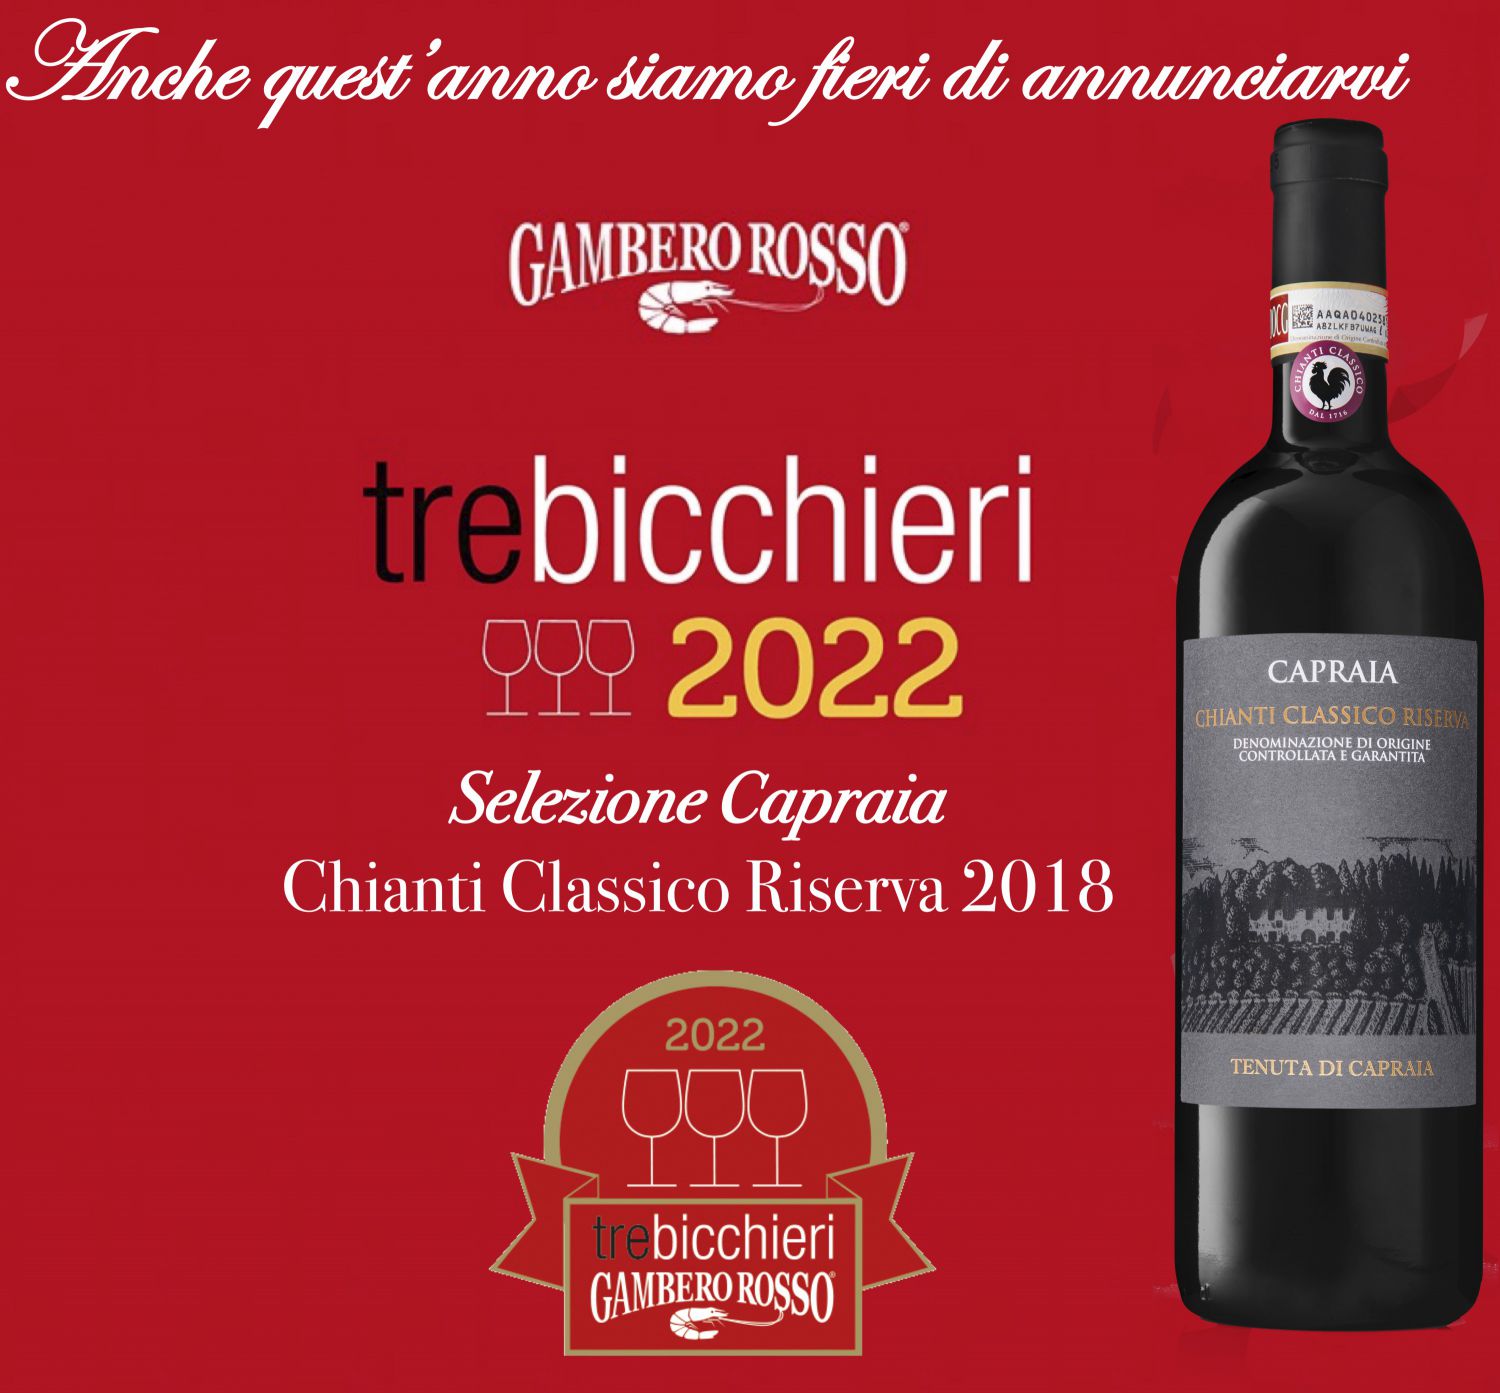 The awards Tre Bicchieri Gambero Rosso 2022 goes to